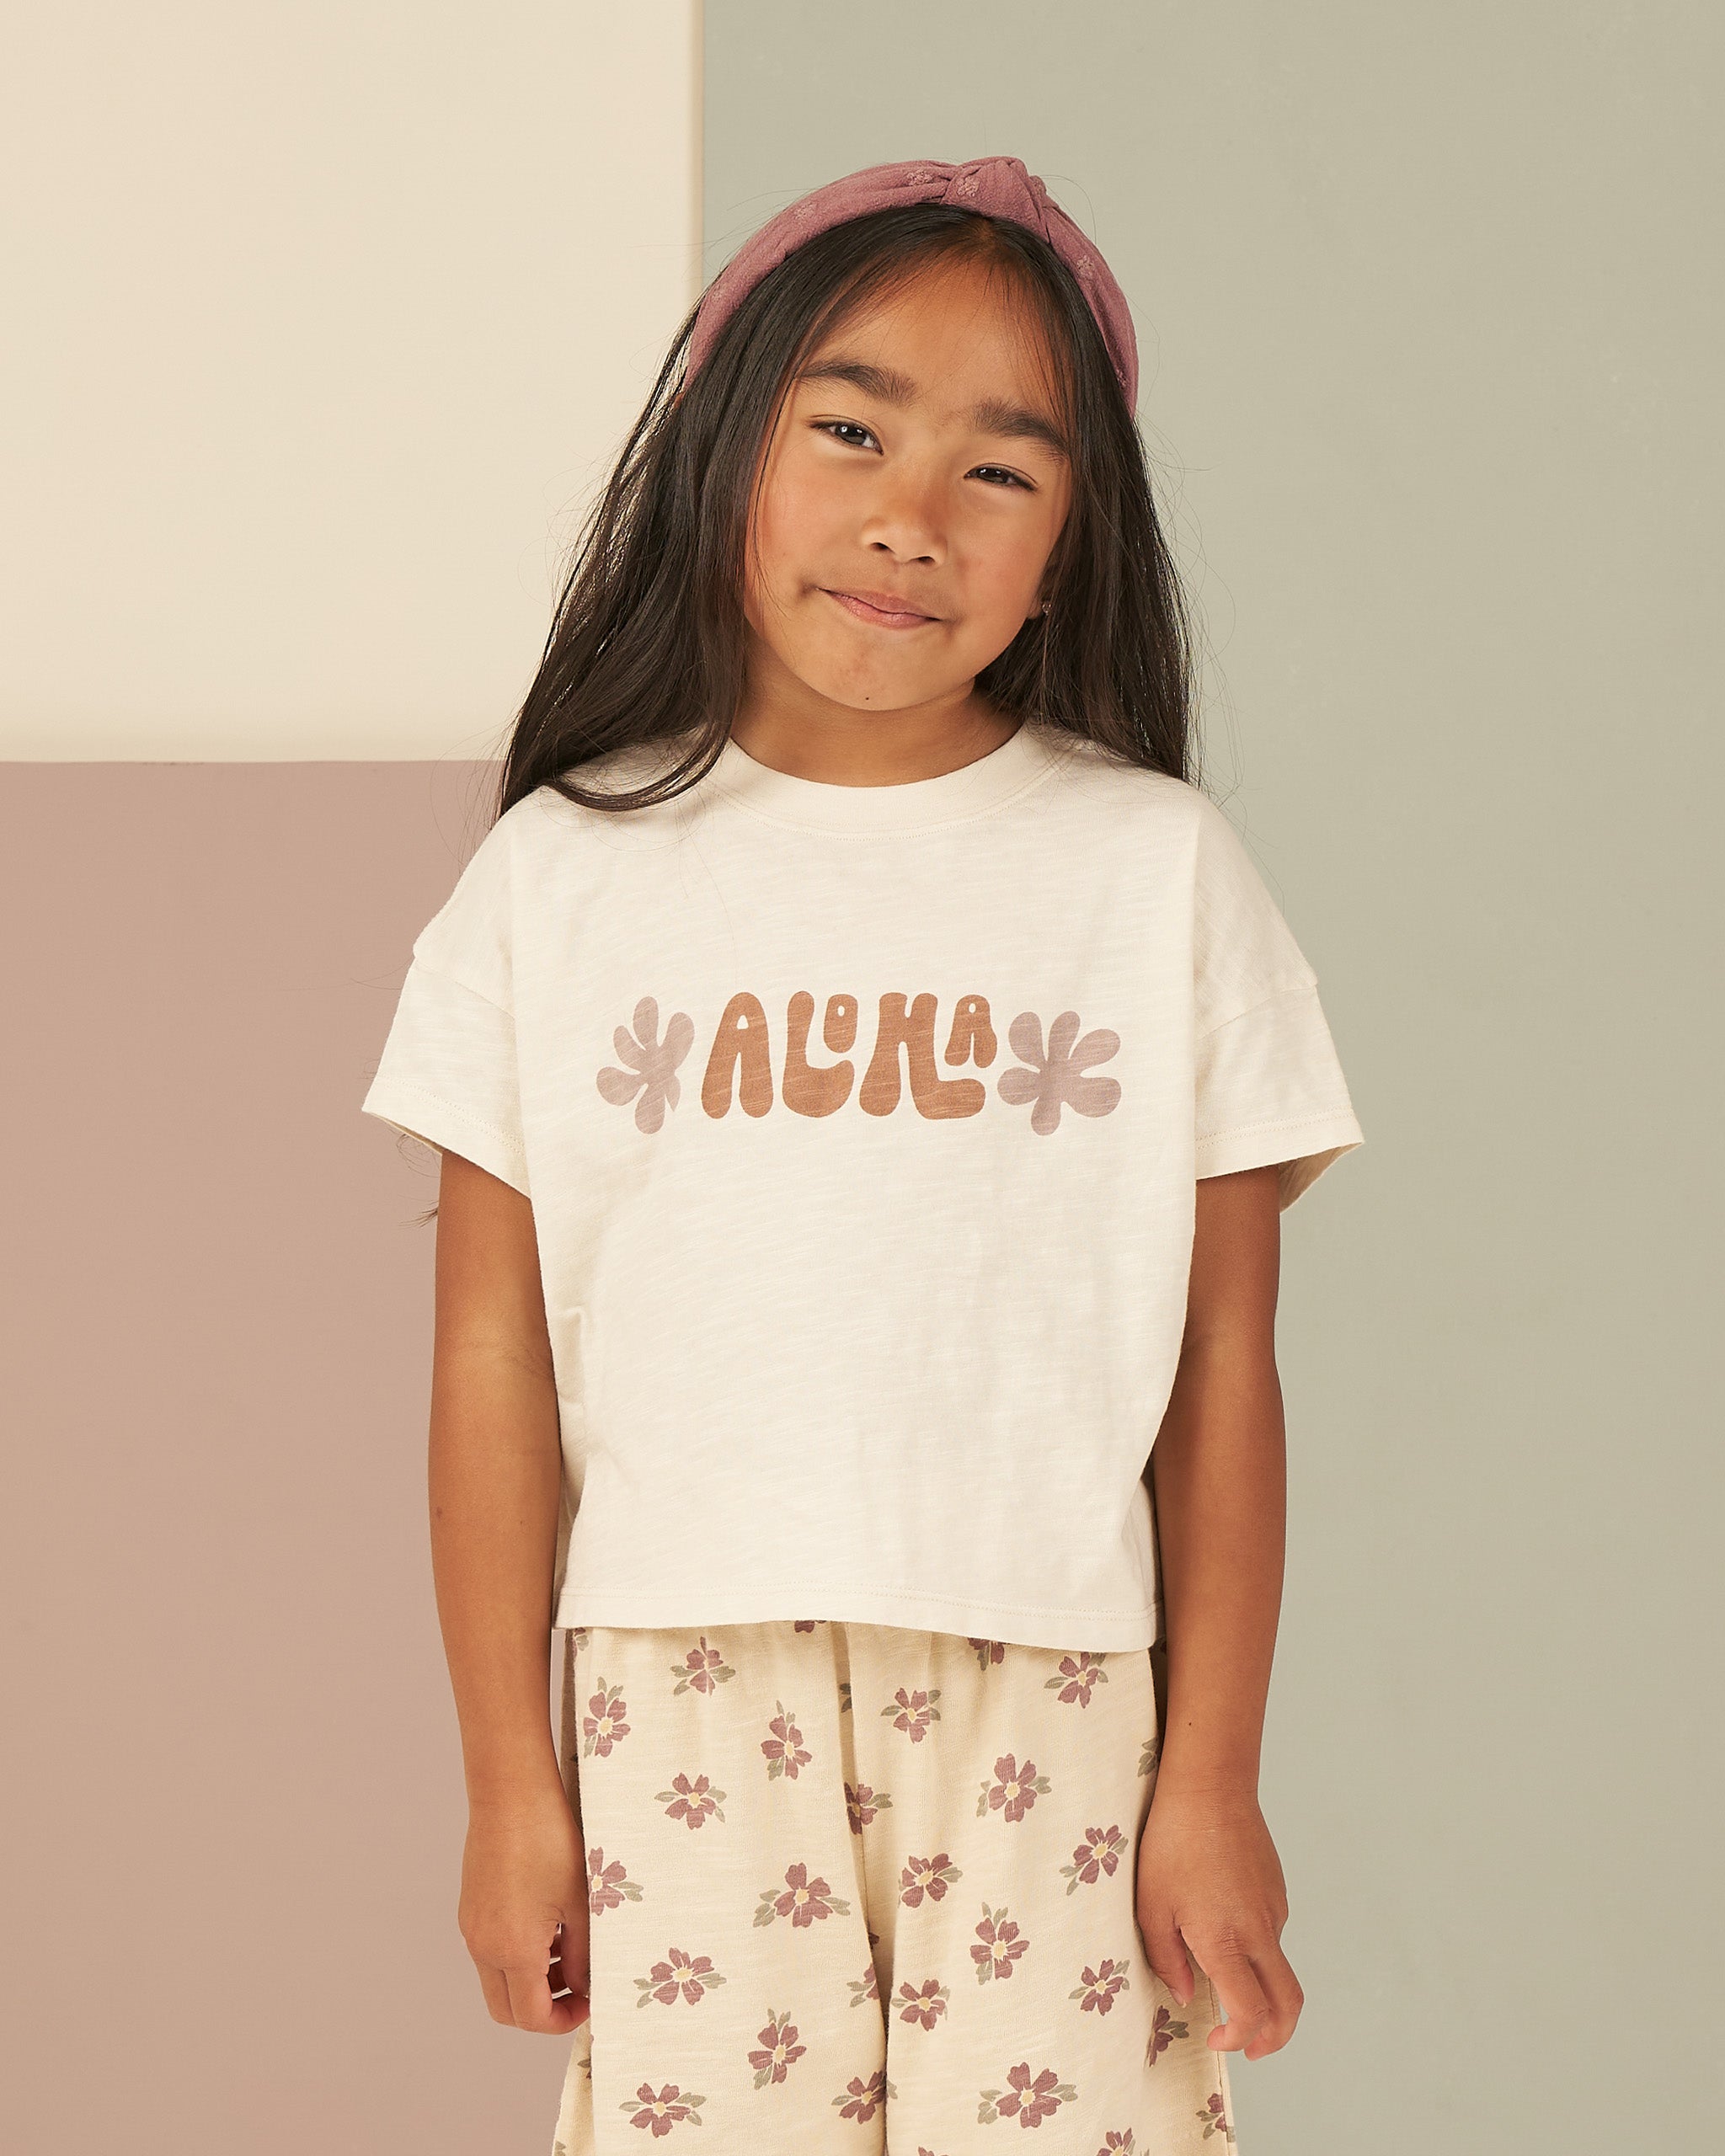 Boxy Tee || Aloha - Rylee + Cru | Kids Clothes | Trendy Baby Clothes | Modern Infant Outfits |